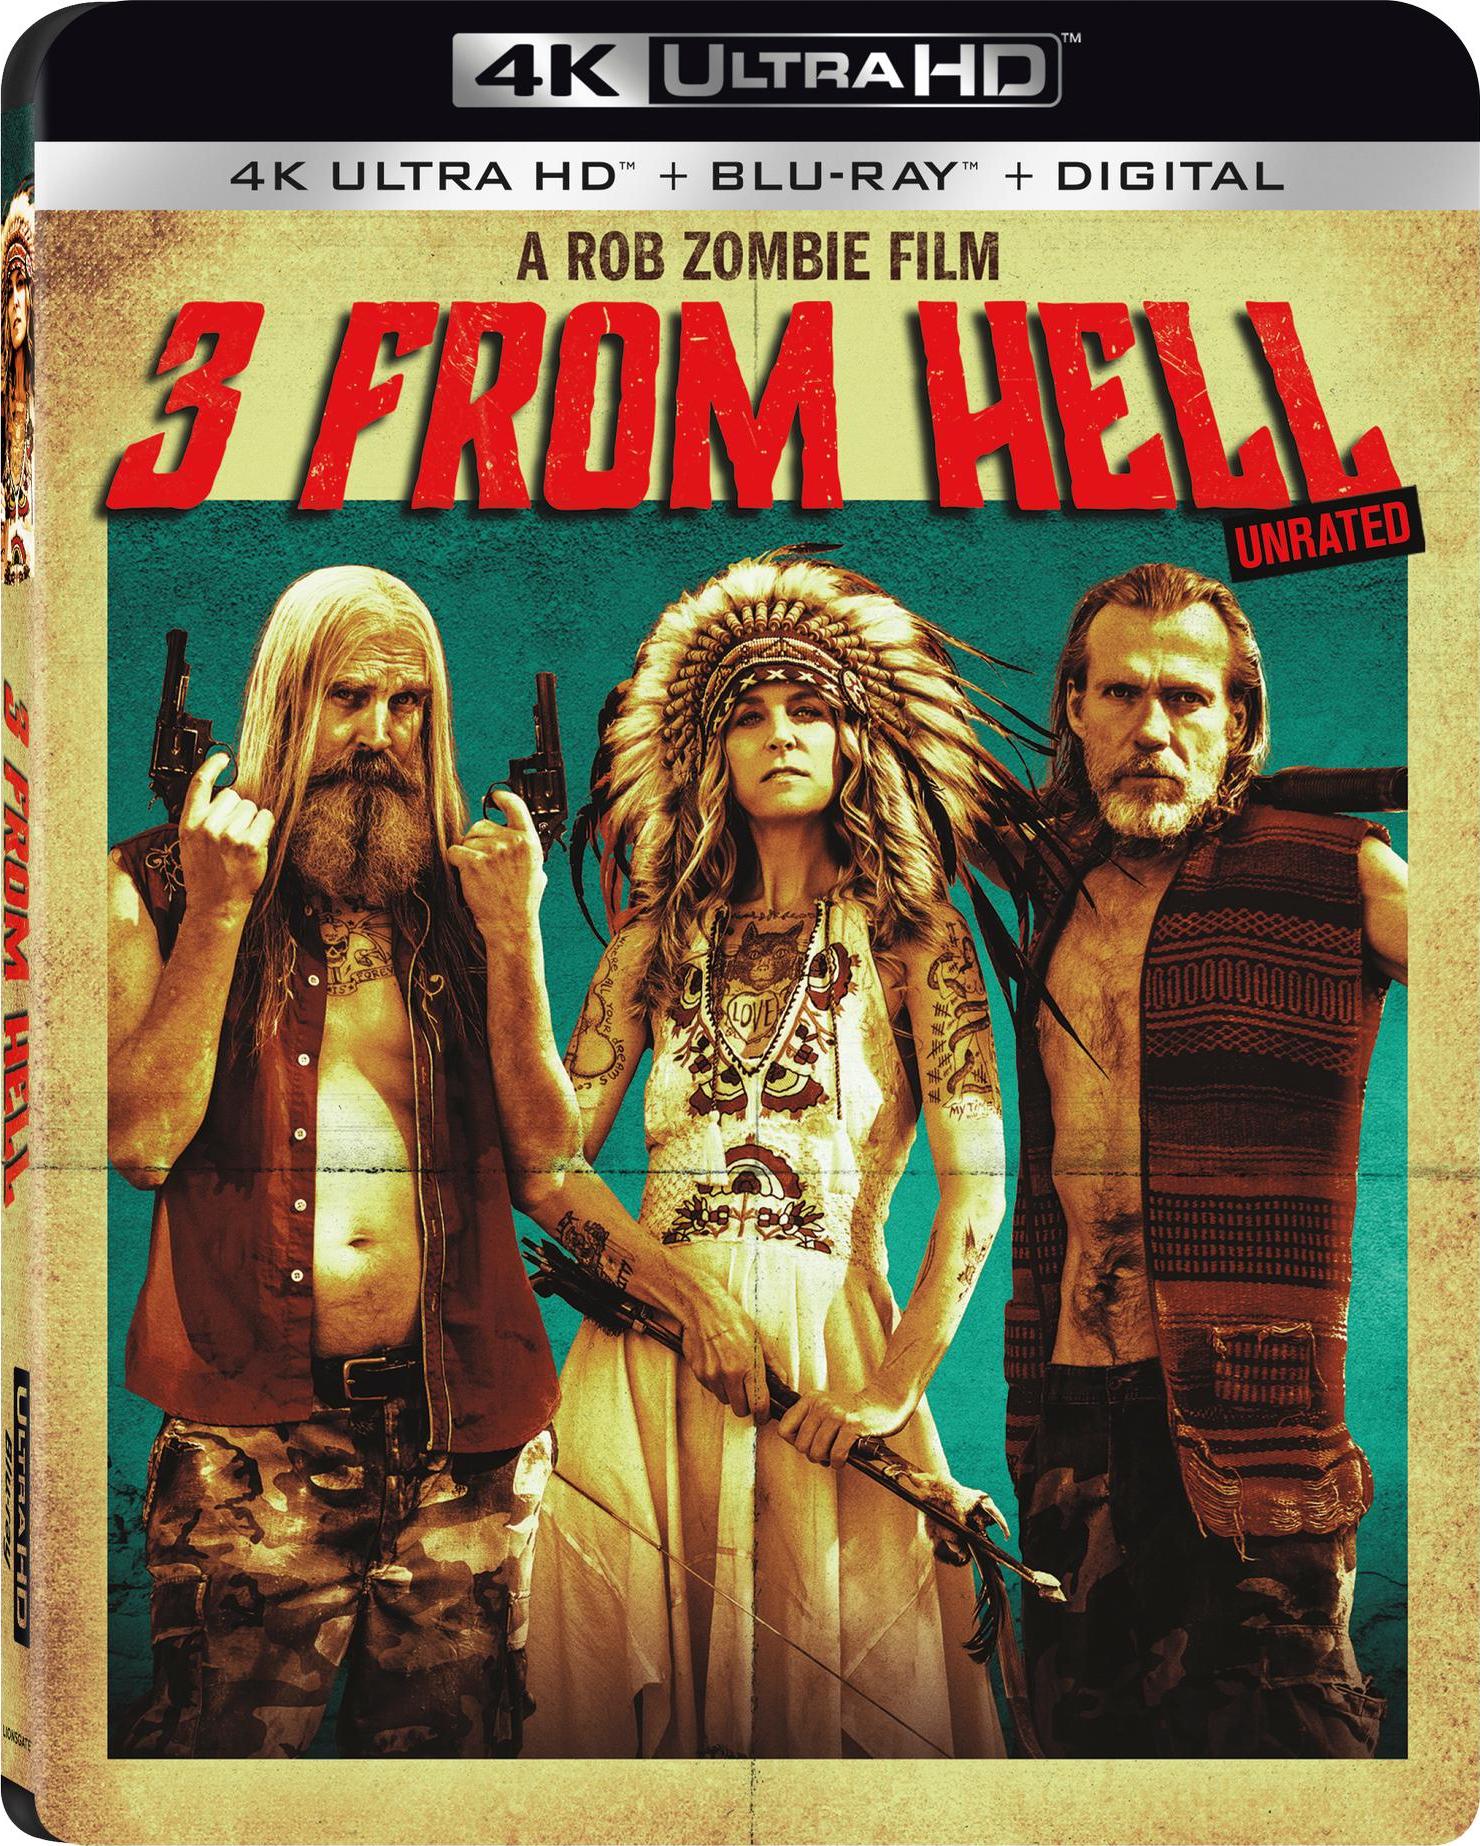 3 FROM HELL 4K UHD/BLU-RAY